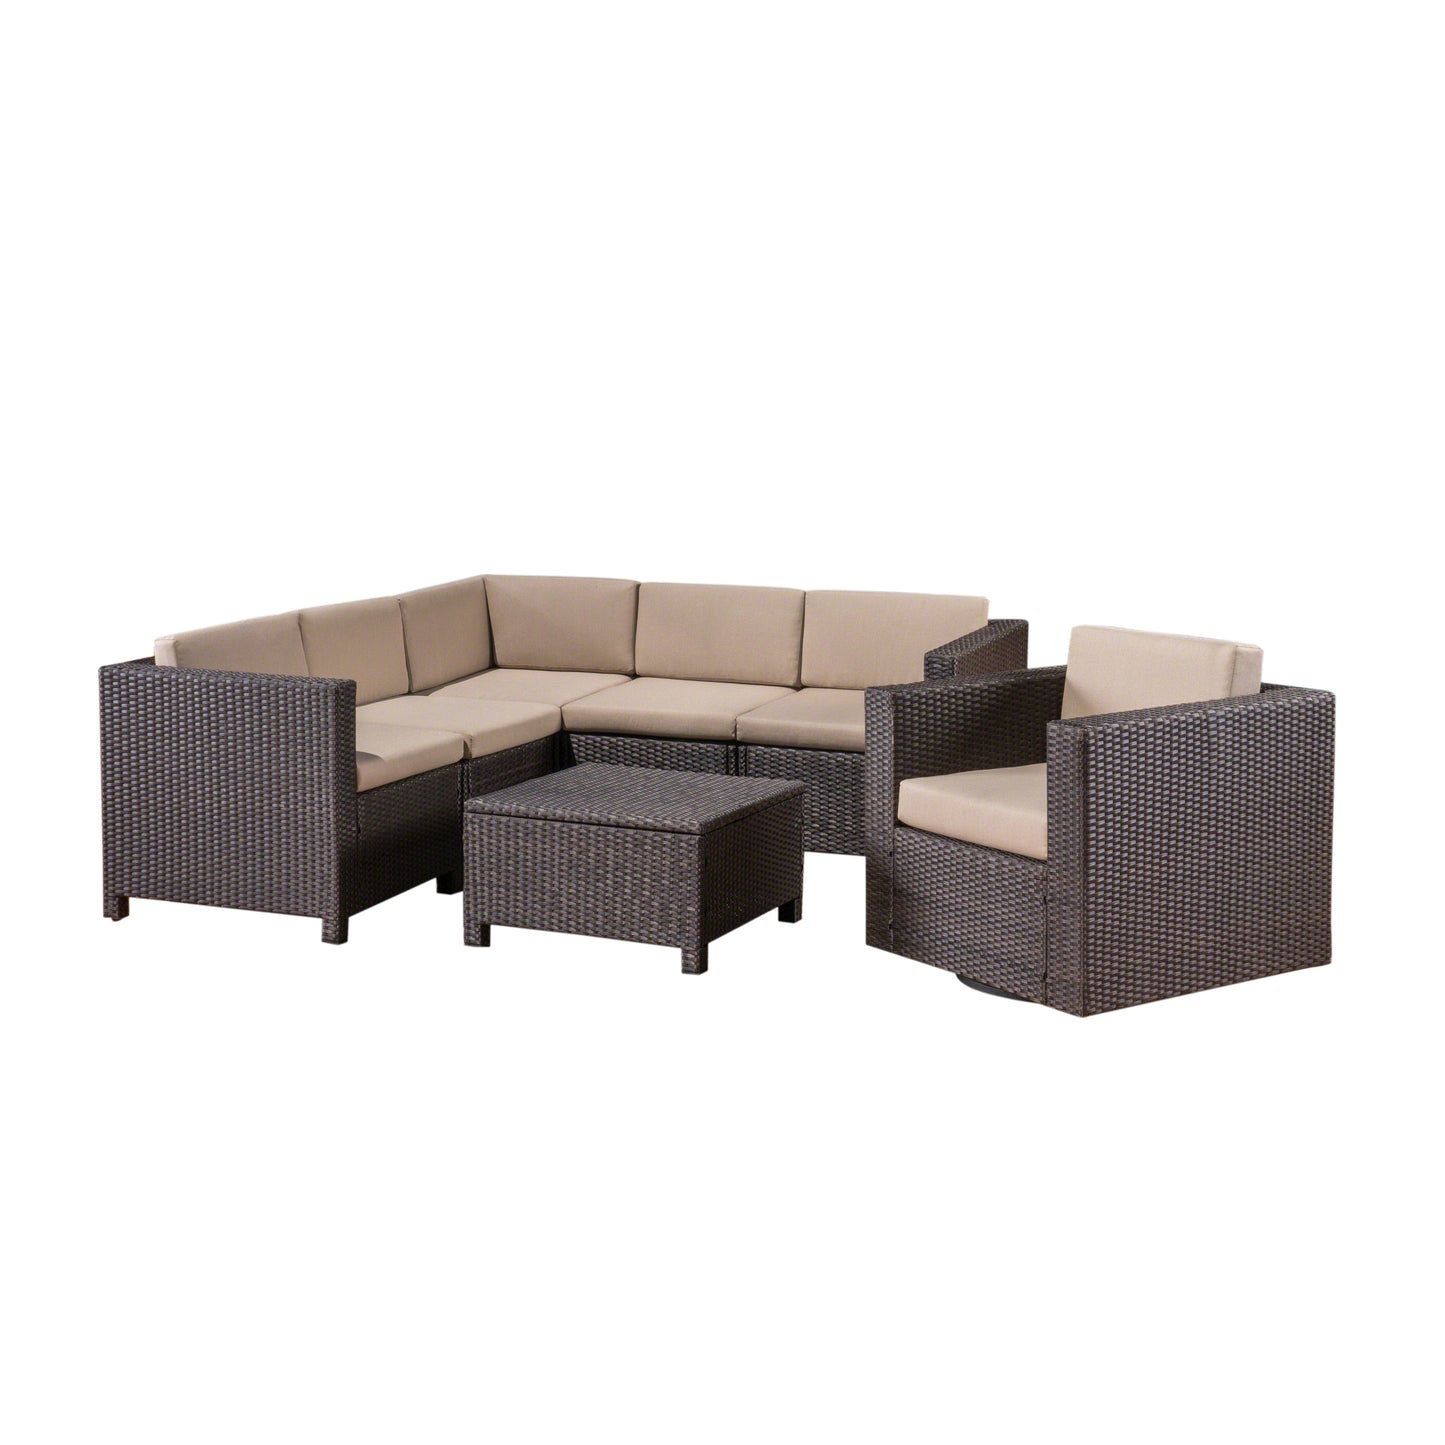 Phillips Outdoor 6 Seater Wicker V-Shaped Sofa and Swivel Chair Set with Water Resistant Cushions